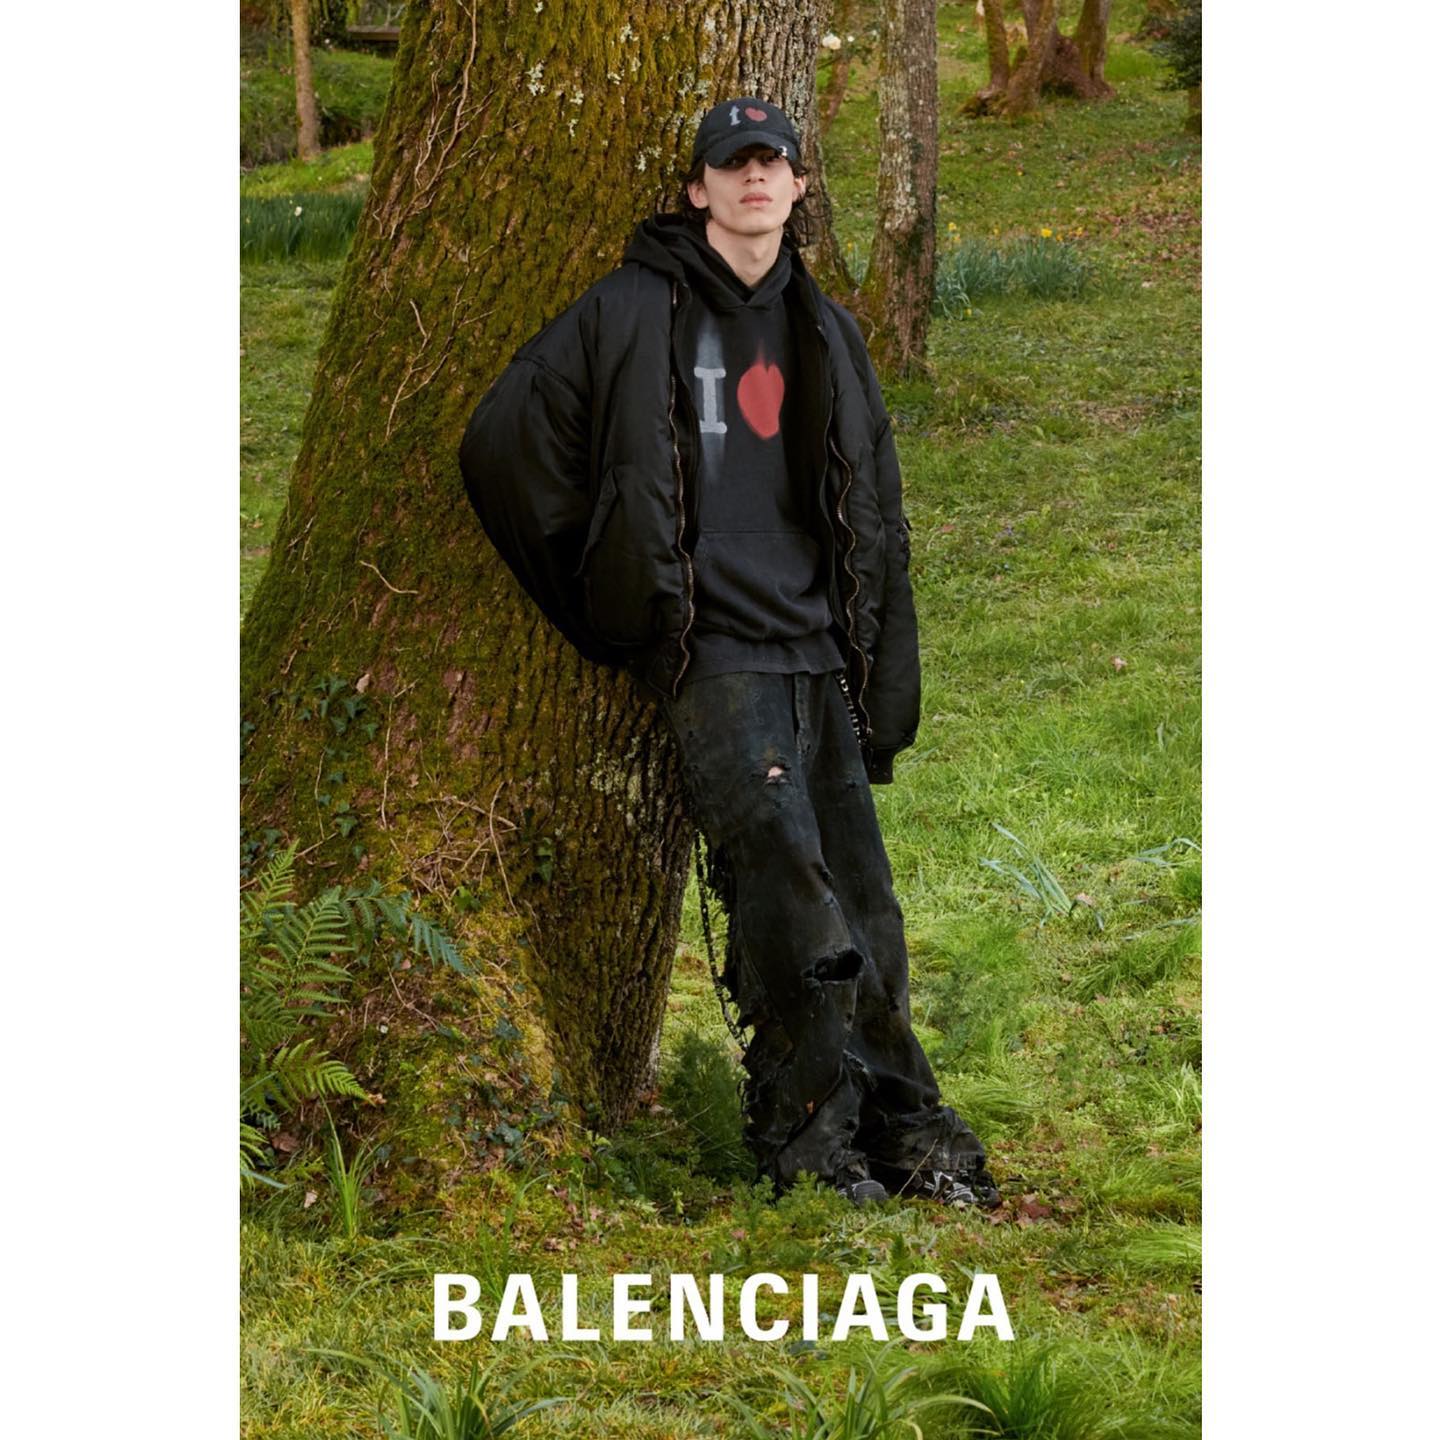 Kaplan (@kapo.h ) for Balenciaga 520 Concept Collection. Photography by Andrea Artemisio, styling by Laetitia Gimenez Adam, hair by Natsumi Ebiko, make-up by Clara Barban.